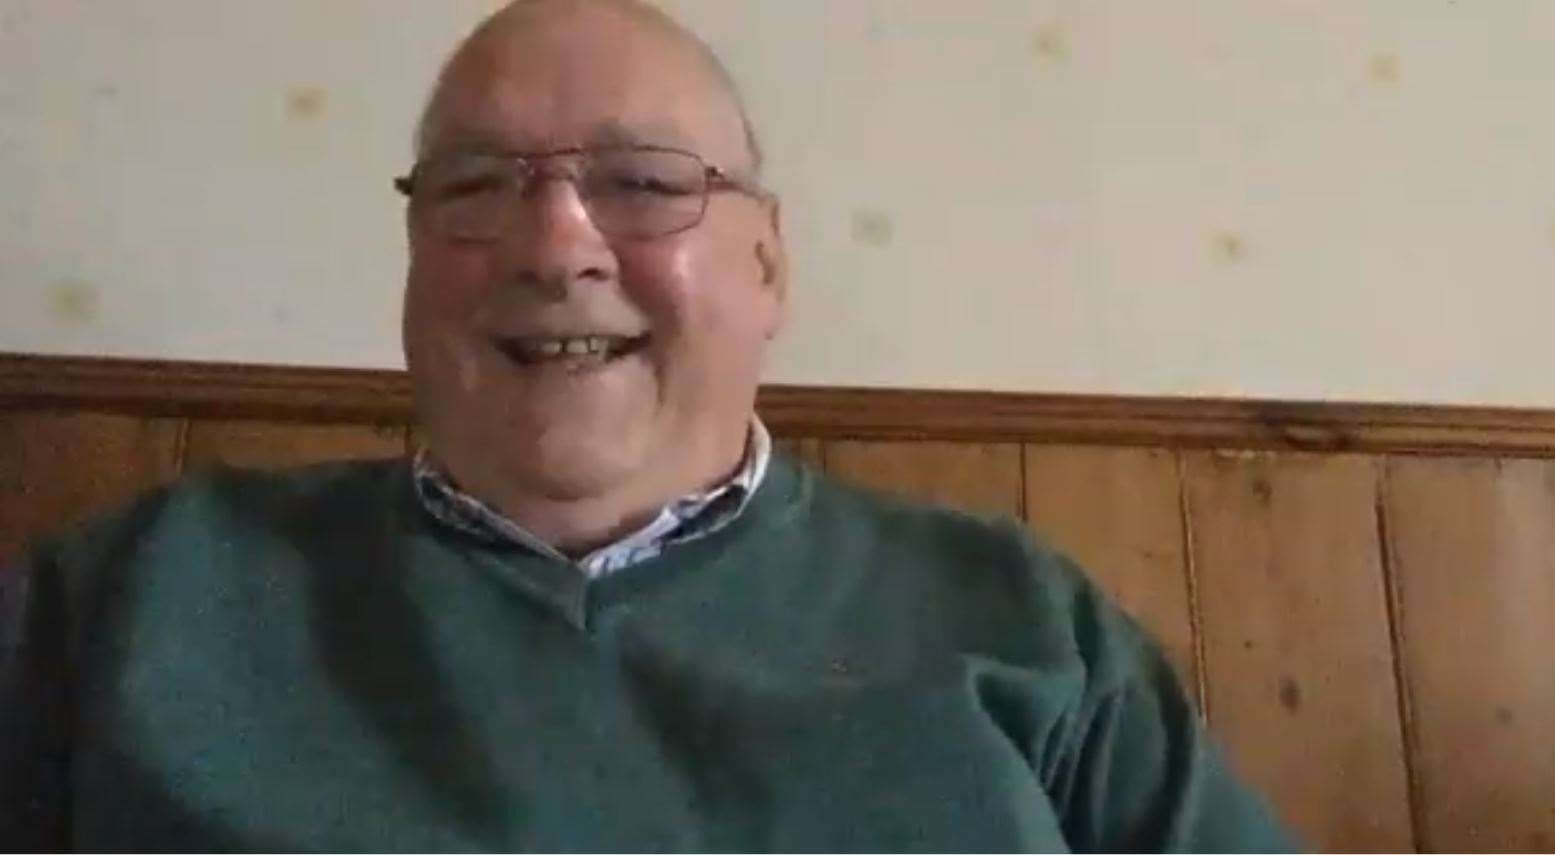 Findochty grandad James Bremner is just "tickety boo" after his lottery win.